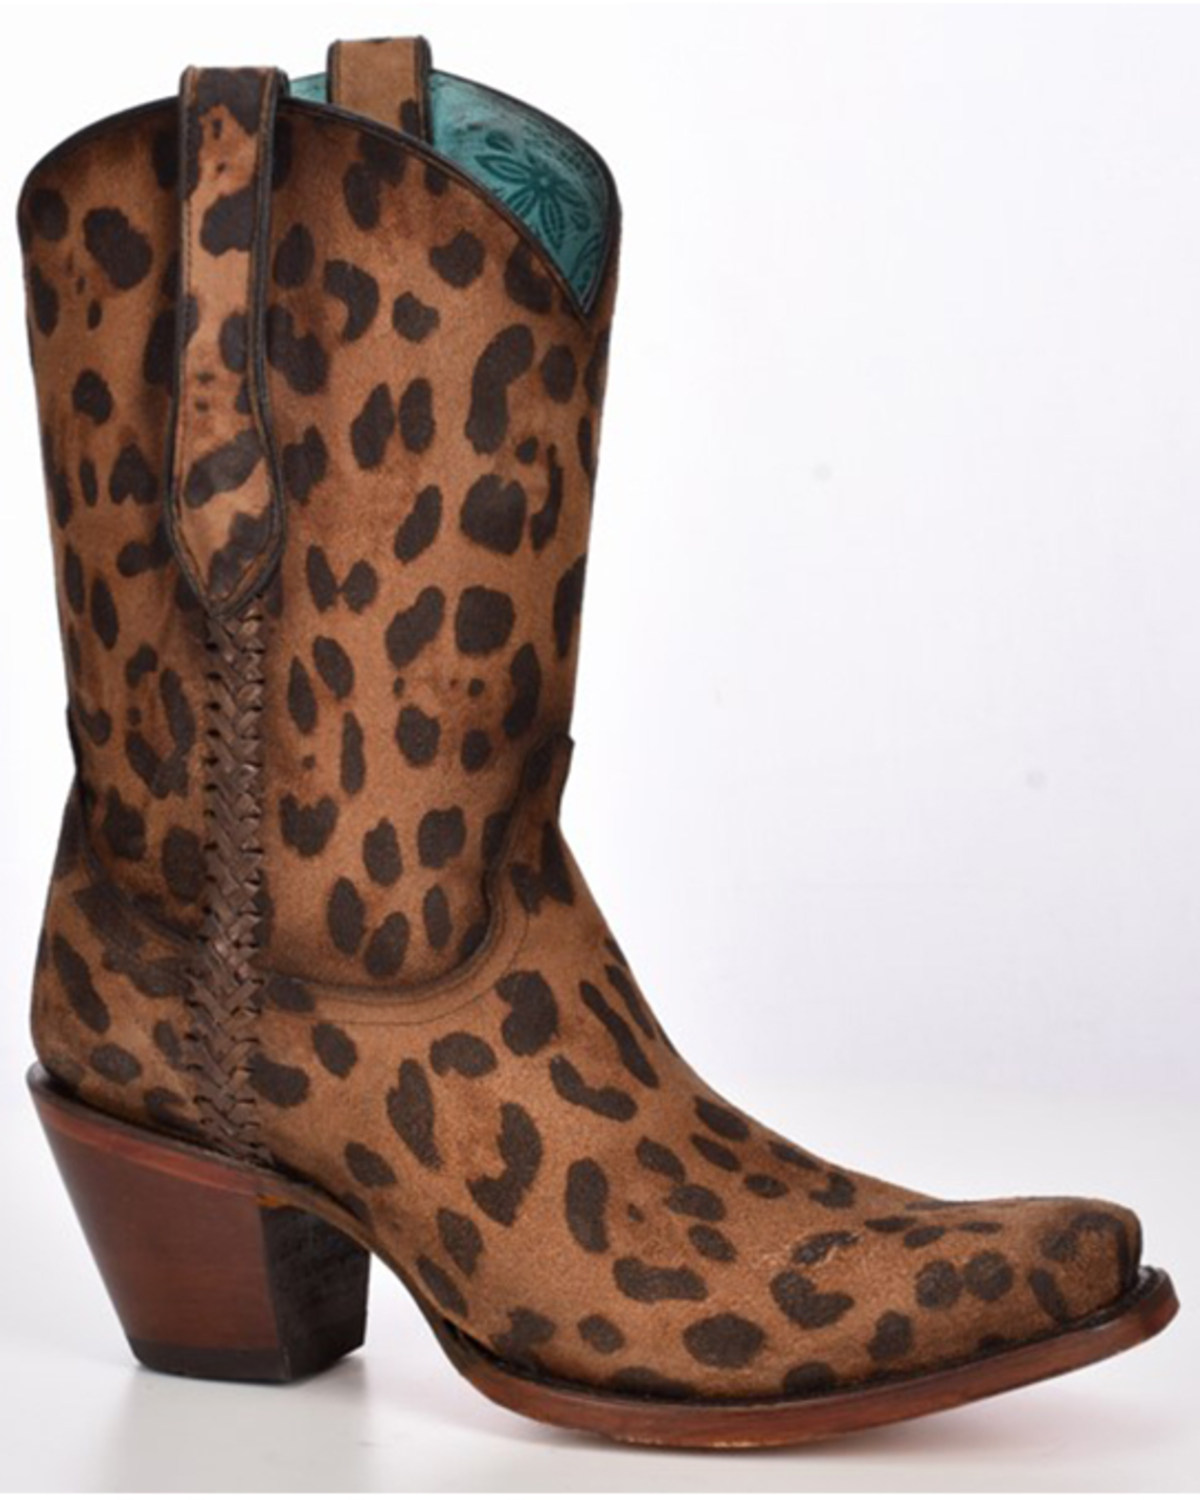 Corral Women's Leopard Print Braided Western Boots - Snip Toe